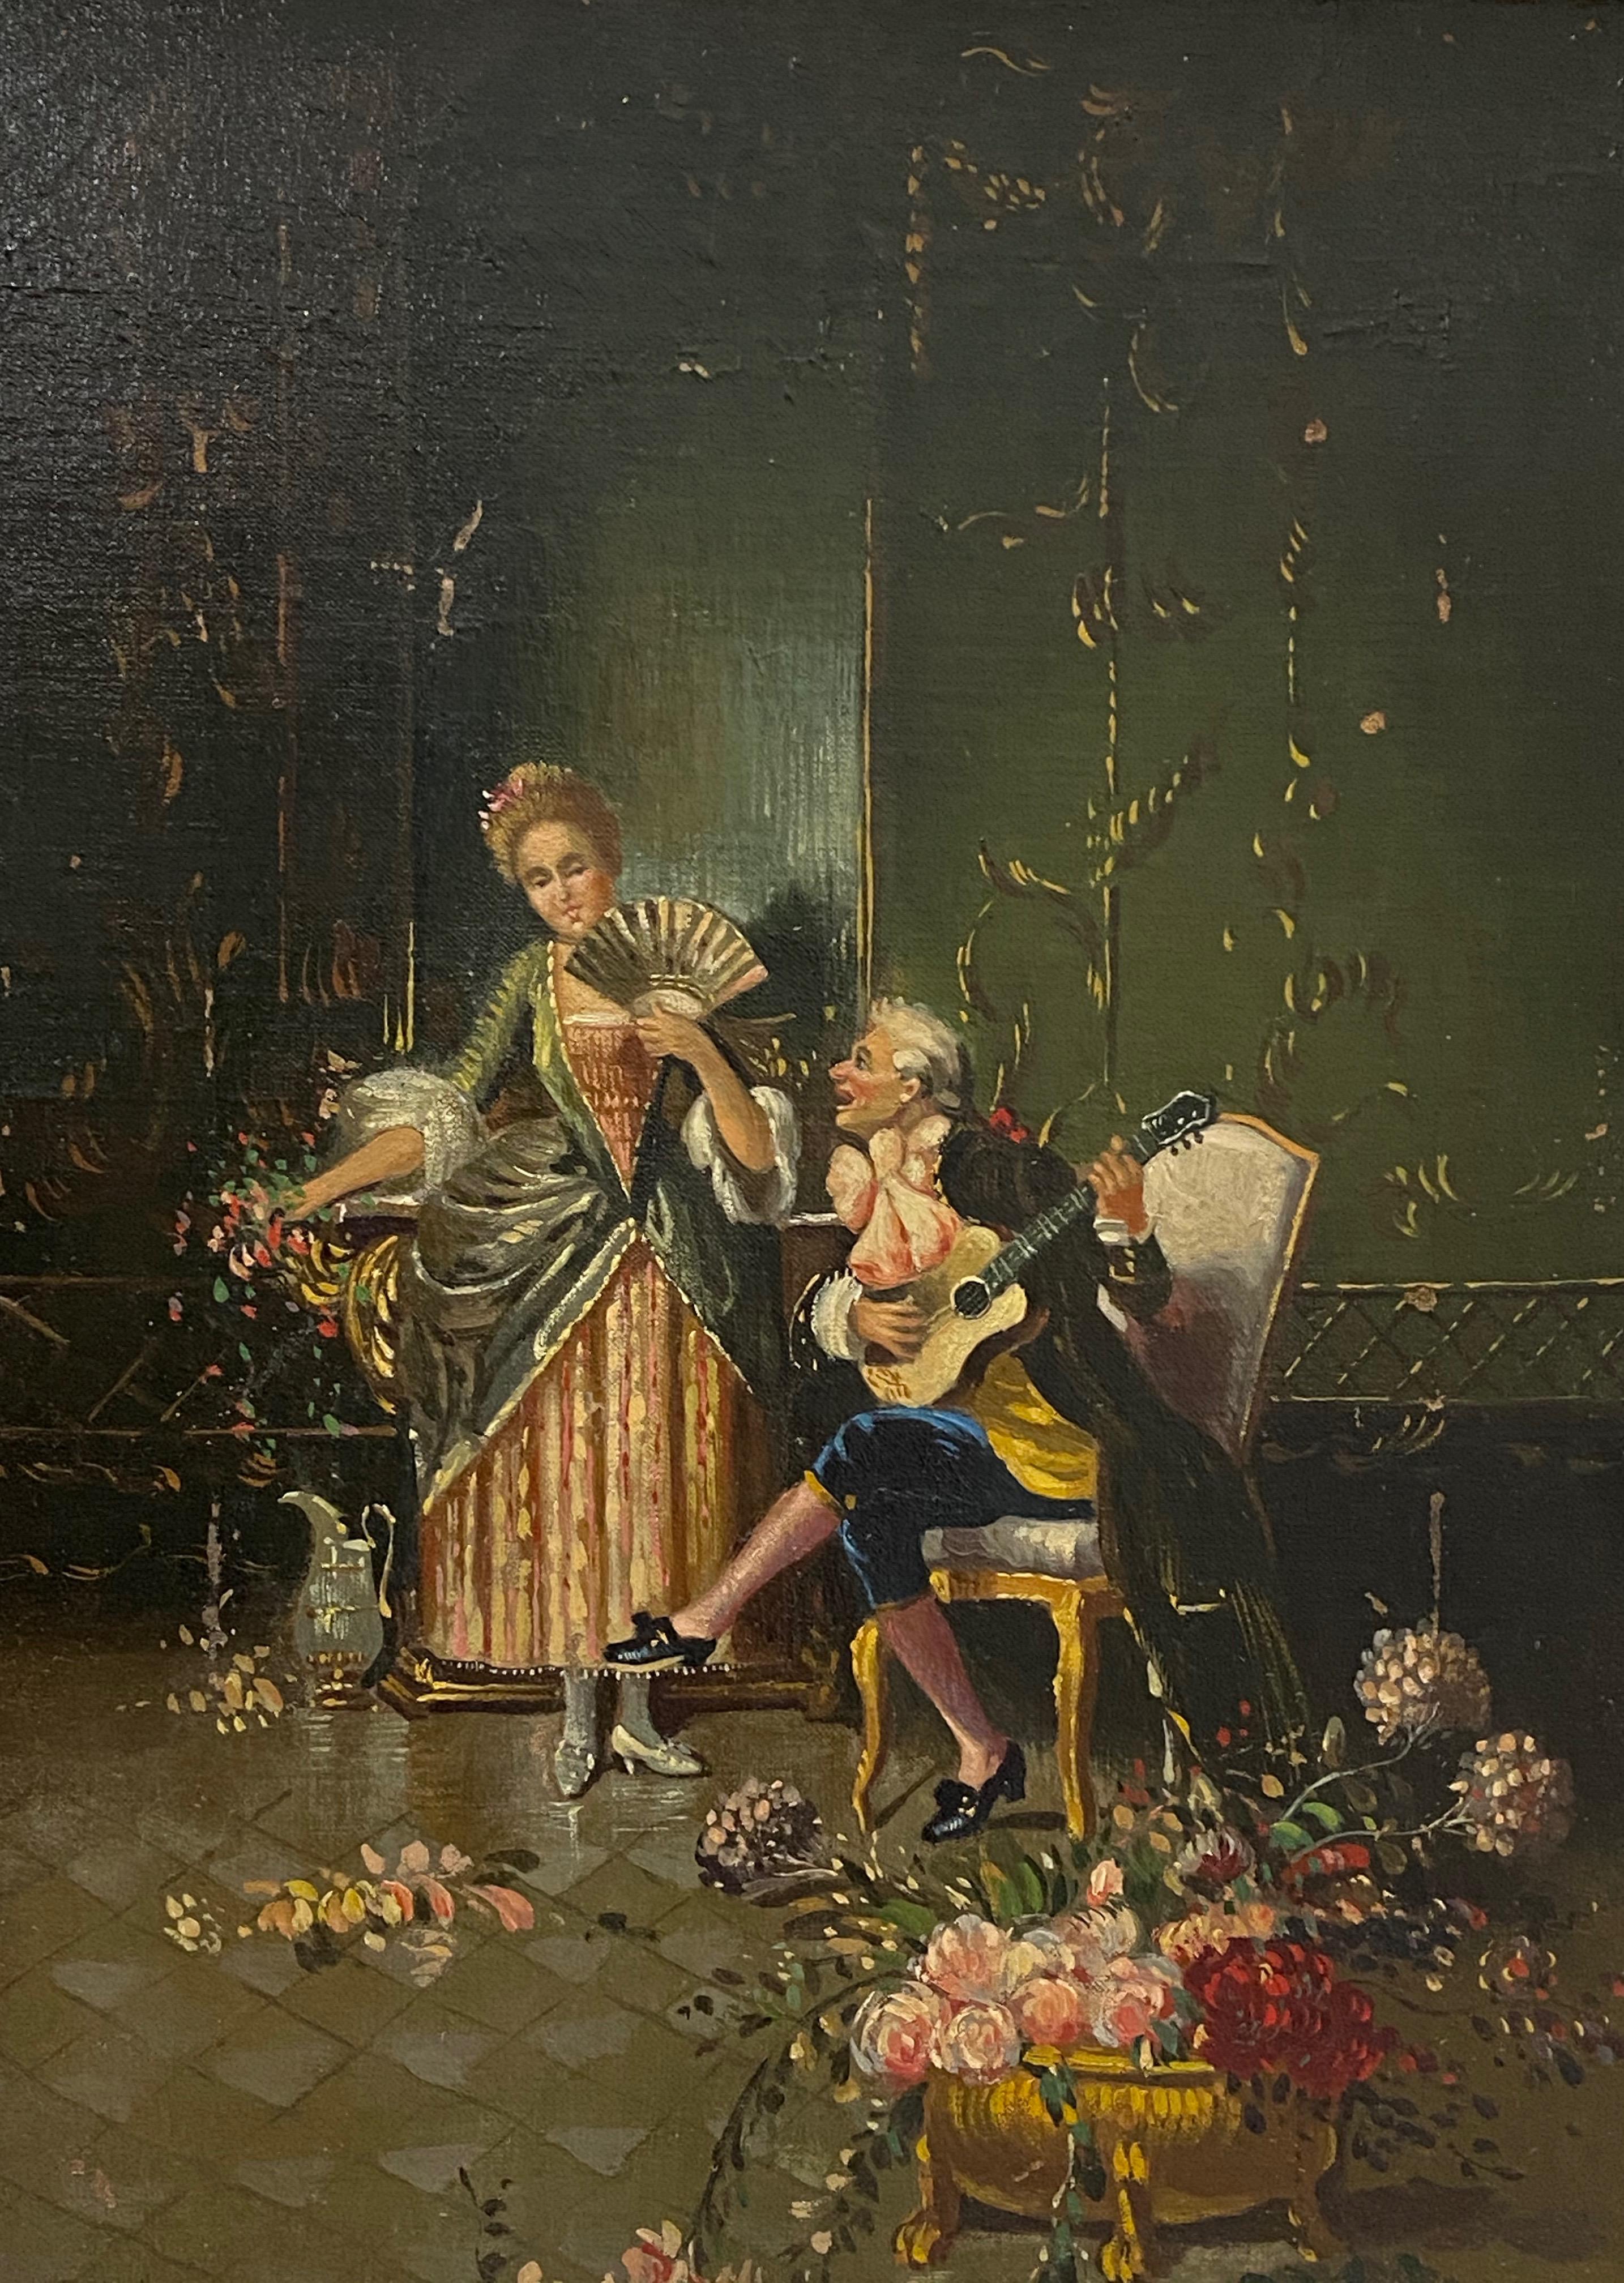 Classic Italian romance oil painting signed Castiglione,

circa 1940s-1950s

The painting depicts a young man romancing a young woman with his guitar.

Created with oils on masonite and housed in a lovely period frame.

Masonite dimensions